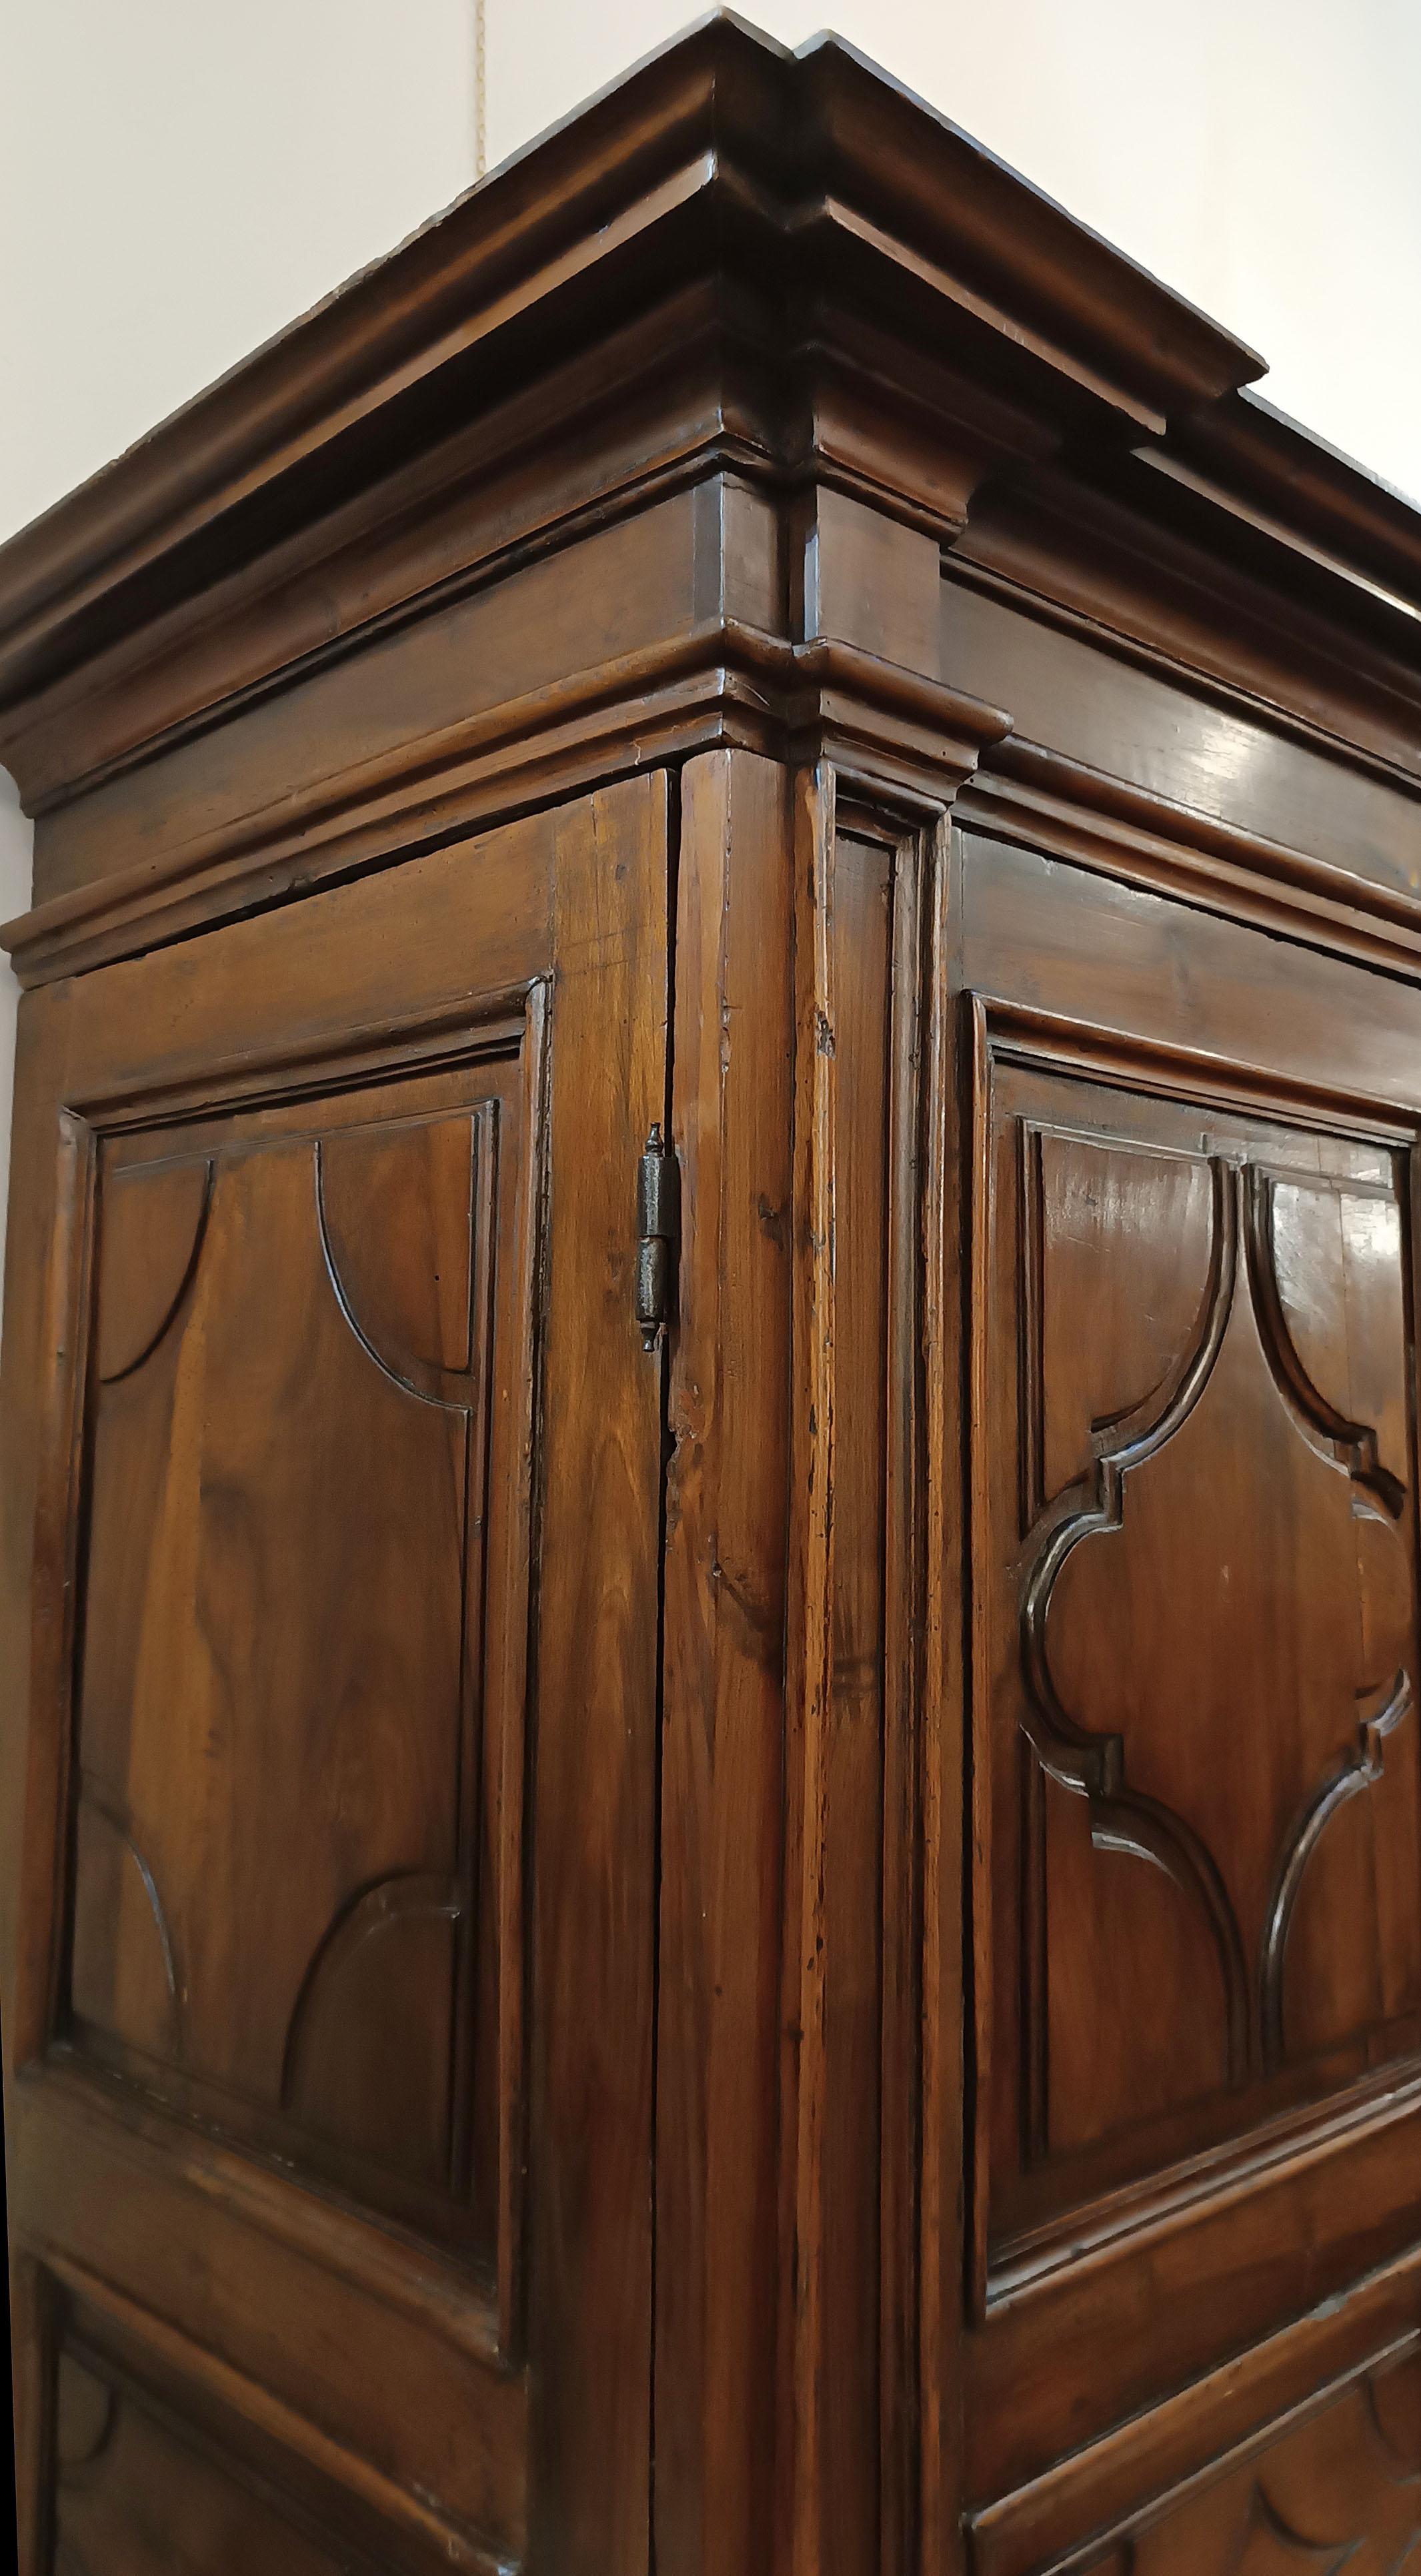 END OF THE 17th CENTURY LOUIS XIV WARDROBE IN SOLID WALNUT For Sale 1